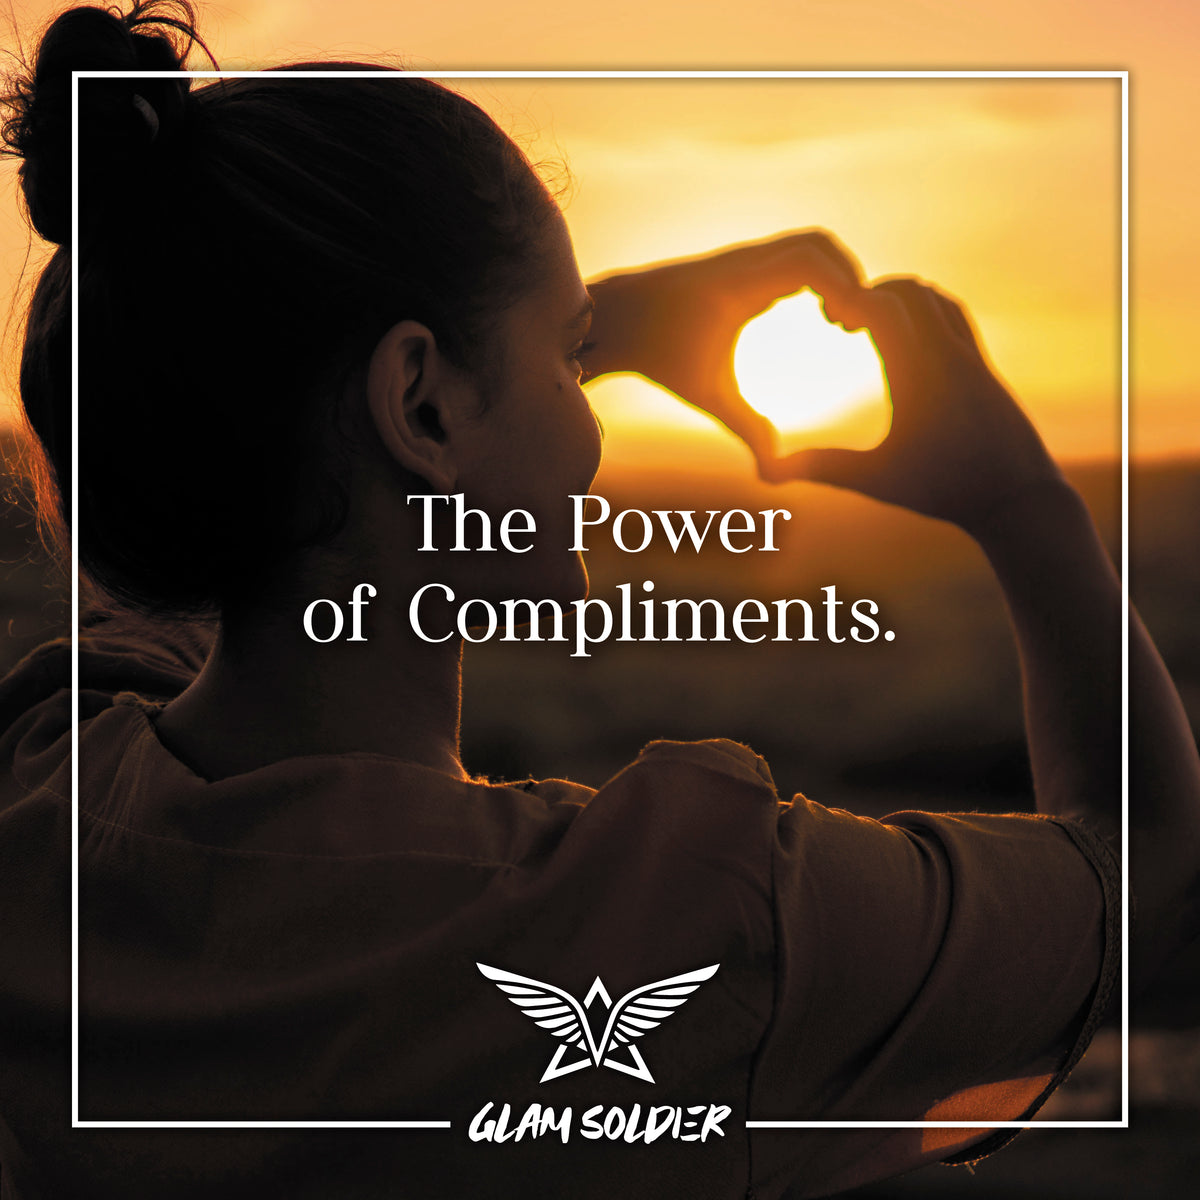 Step 1 - The Power of Compliments